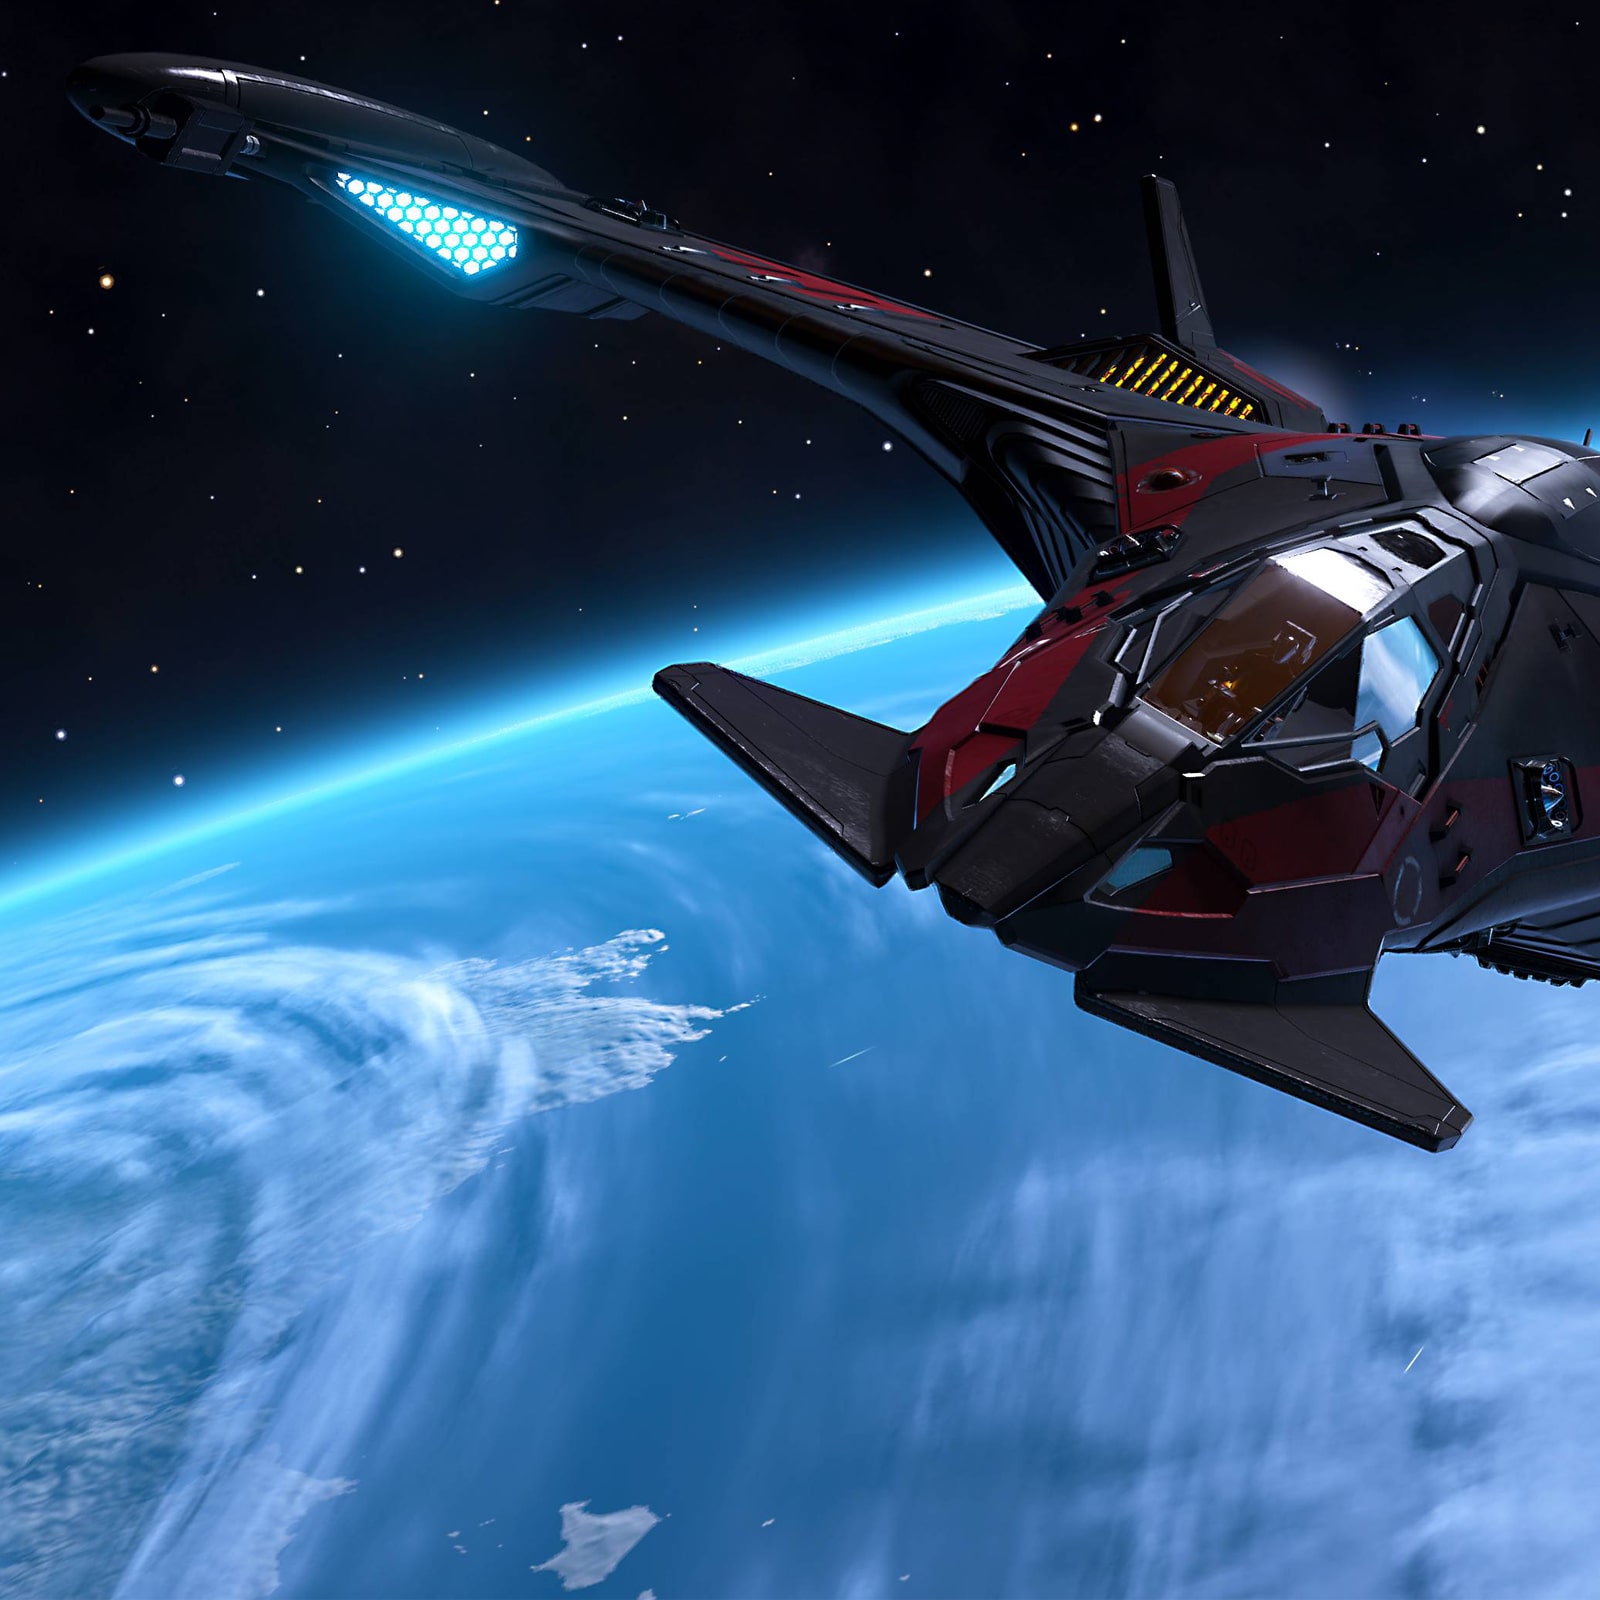 Elite Dangerous teases fleet carriers and rebrands its premium currency | PC Gamer